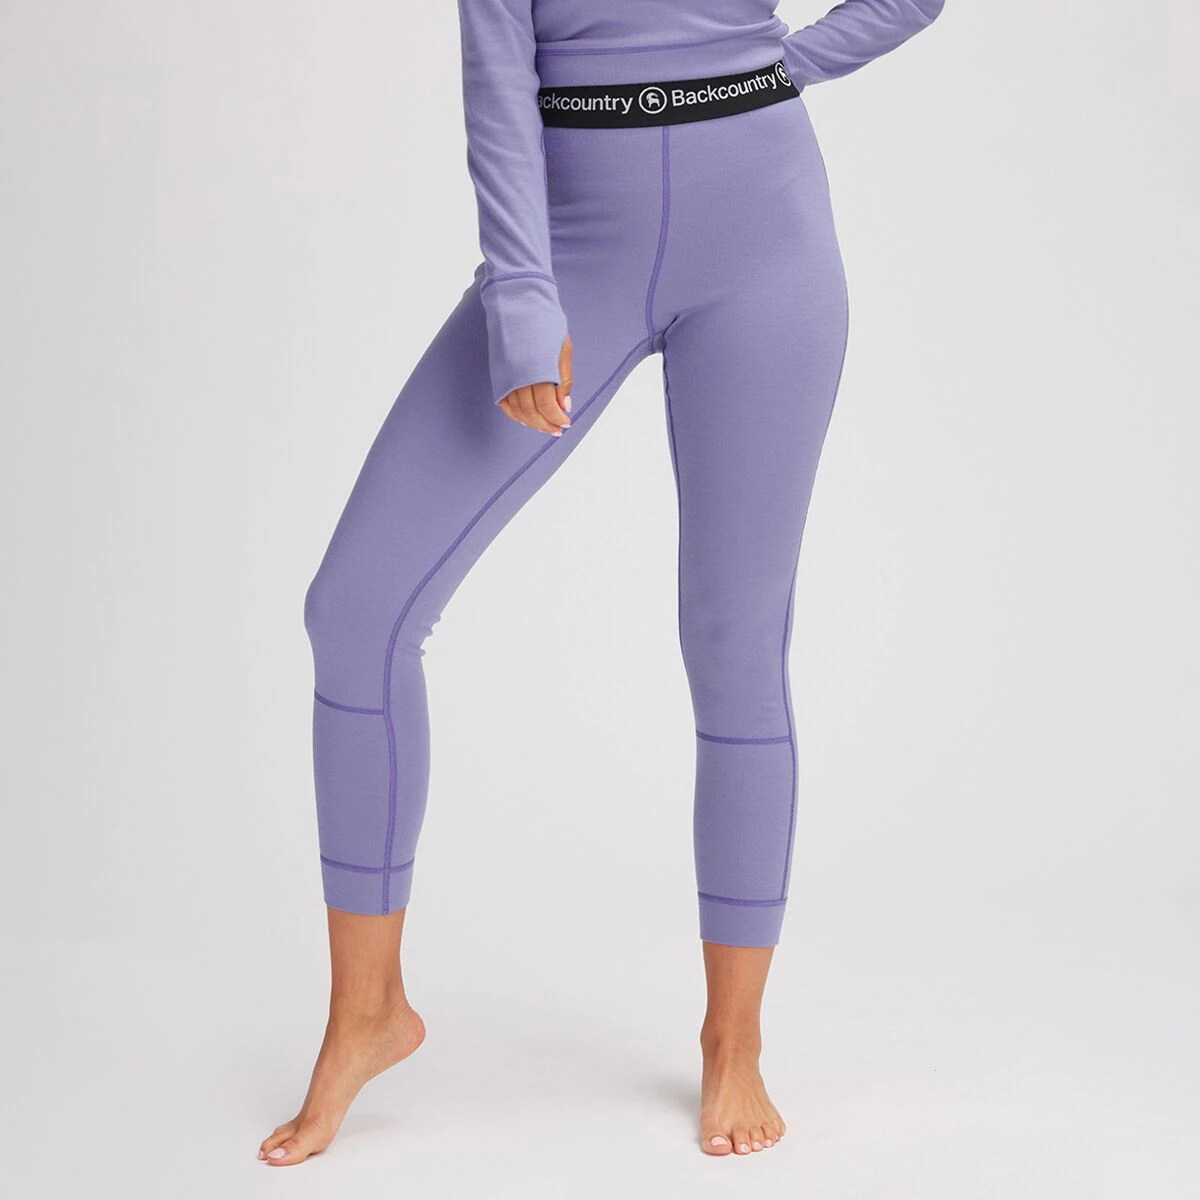 model from the waist down wearing backcountry base layer bottoms in purple that are now on sale at backcountry